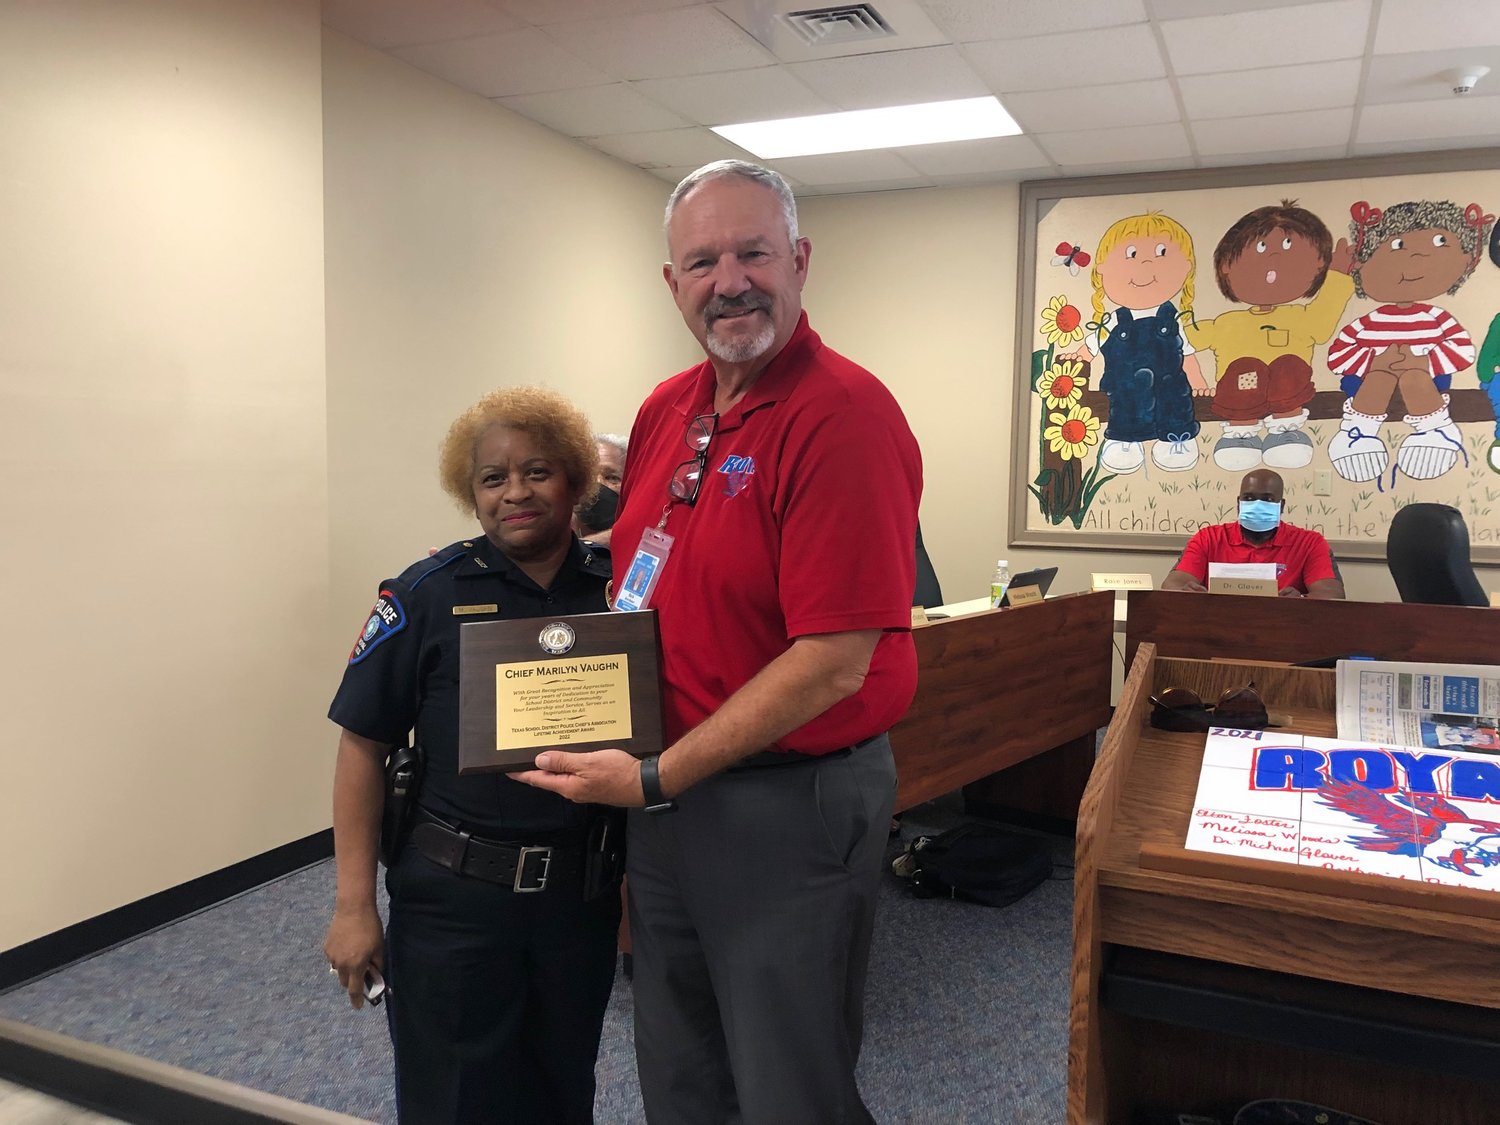 Royal ISD Police Chief Marilyn Vaughn received with the Lifetime Achievement Award at the 2022 Texas School District Police Chiefs Association Conference in San Antonio. The award was presented by Chief Solomon Cook, association president. Here she is pictured with Royal ISD Superintendent Rick Kershner.